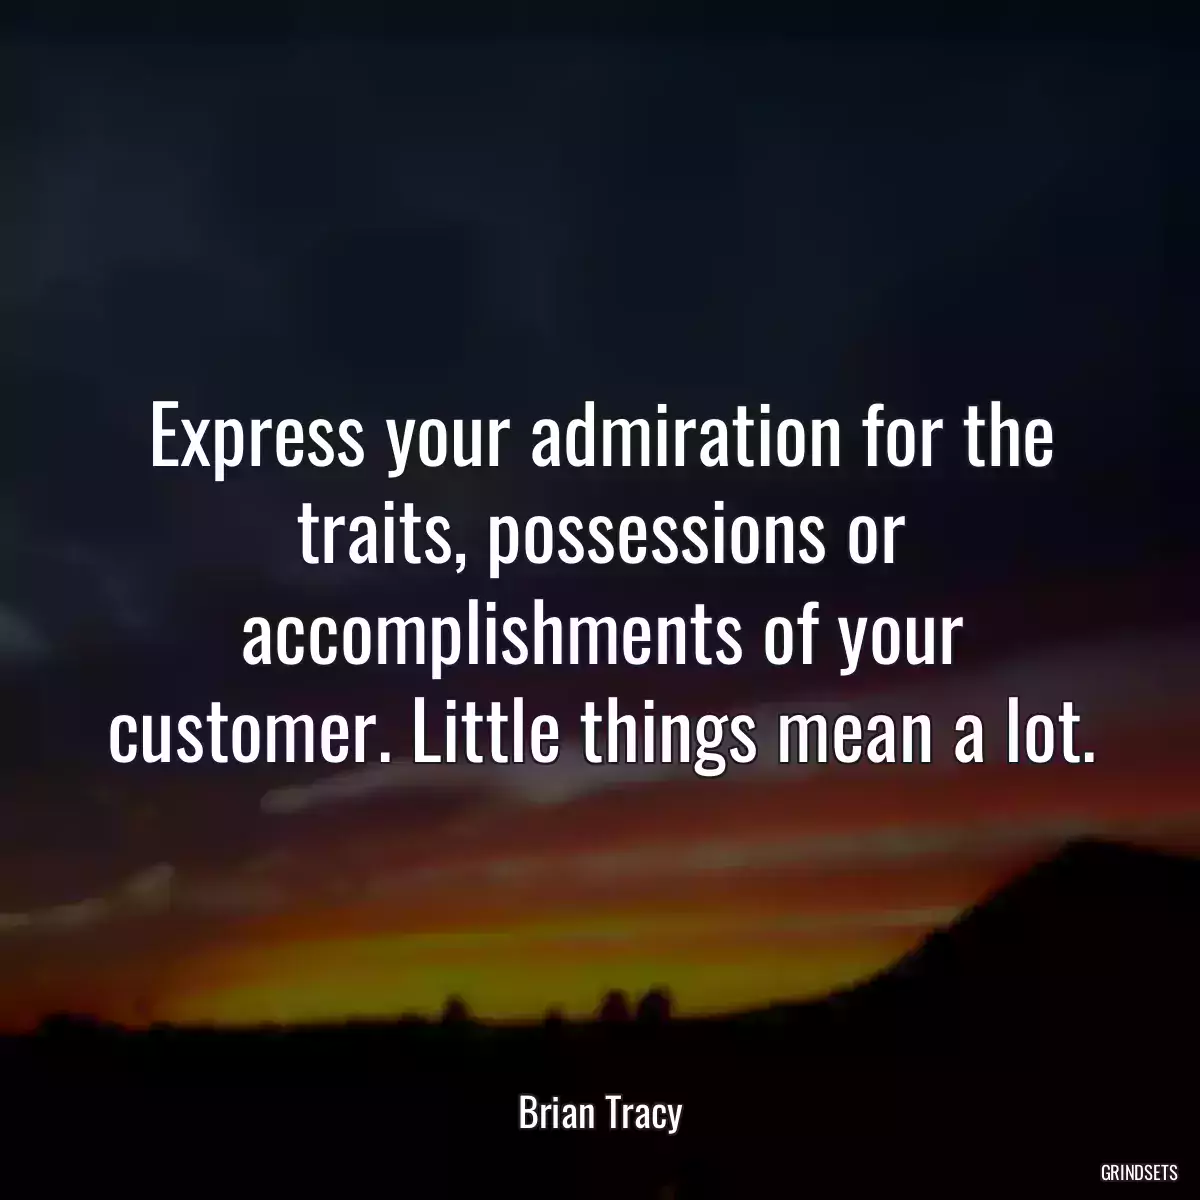 Express your admiration for the traits, possessions or accomplishments of your customer. Little things mean a lot.